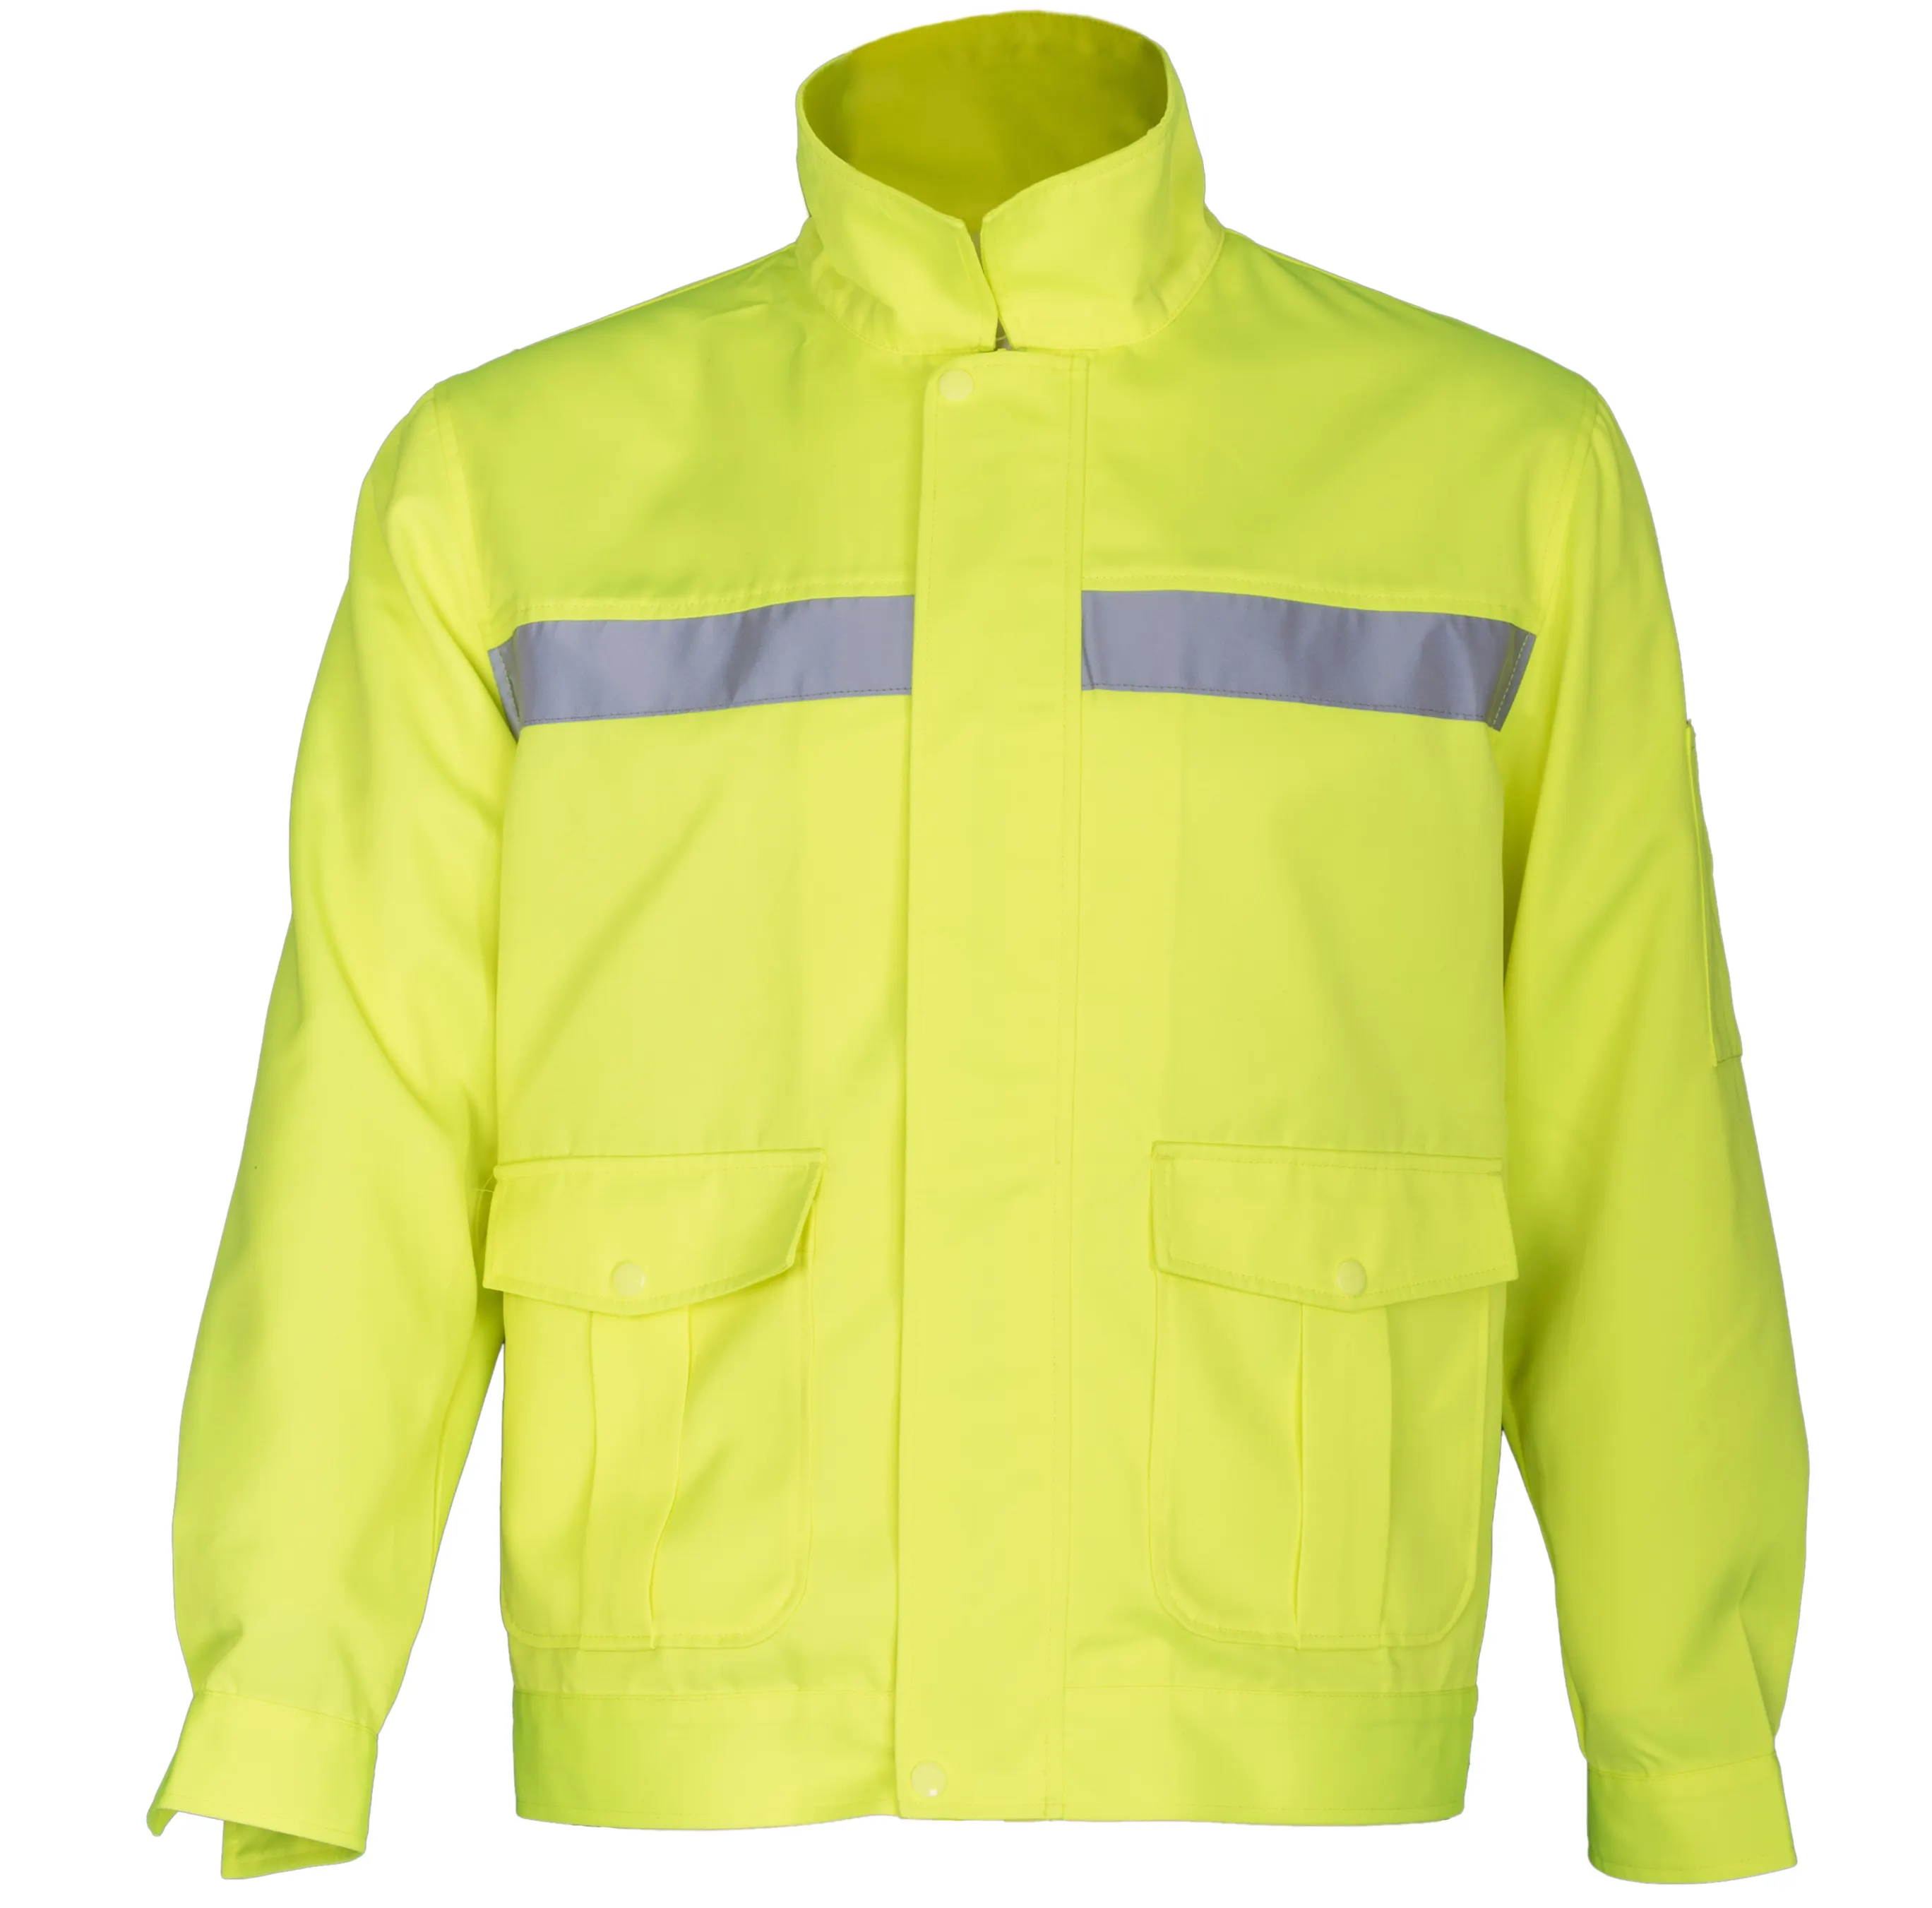 100% polyester oxford PU coated fluorescent ripstop fabric outdoor safety uniform fabric